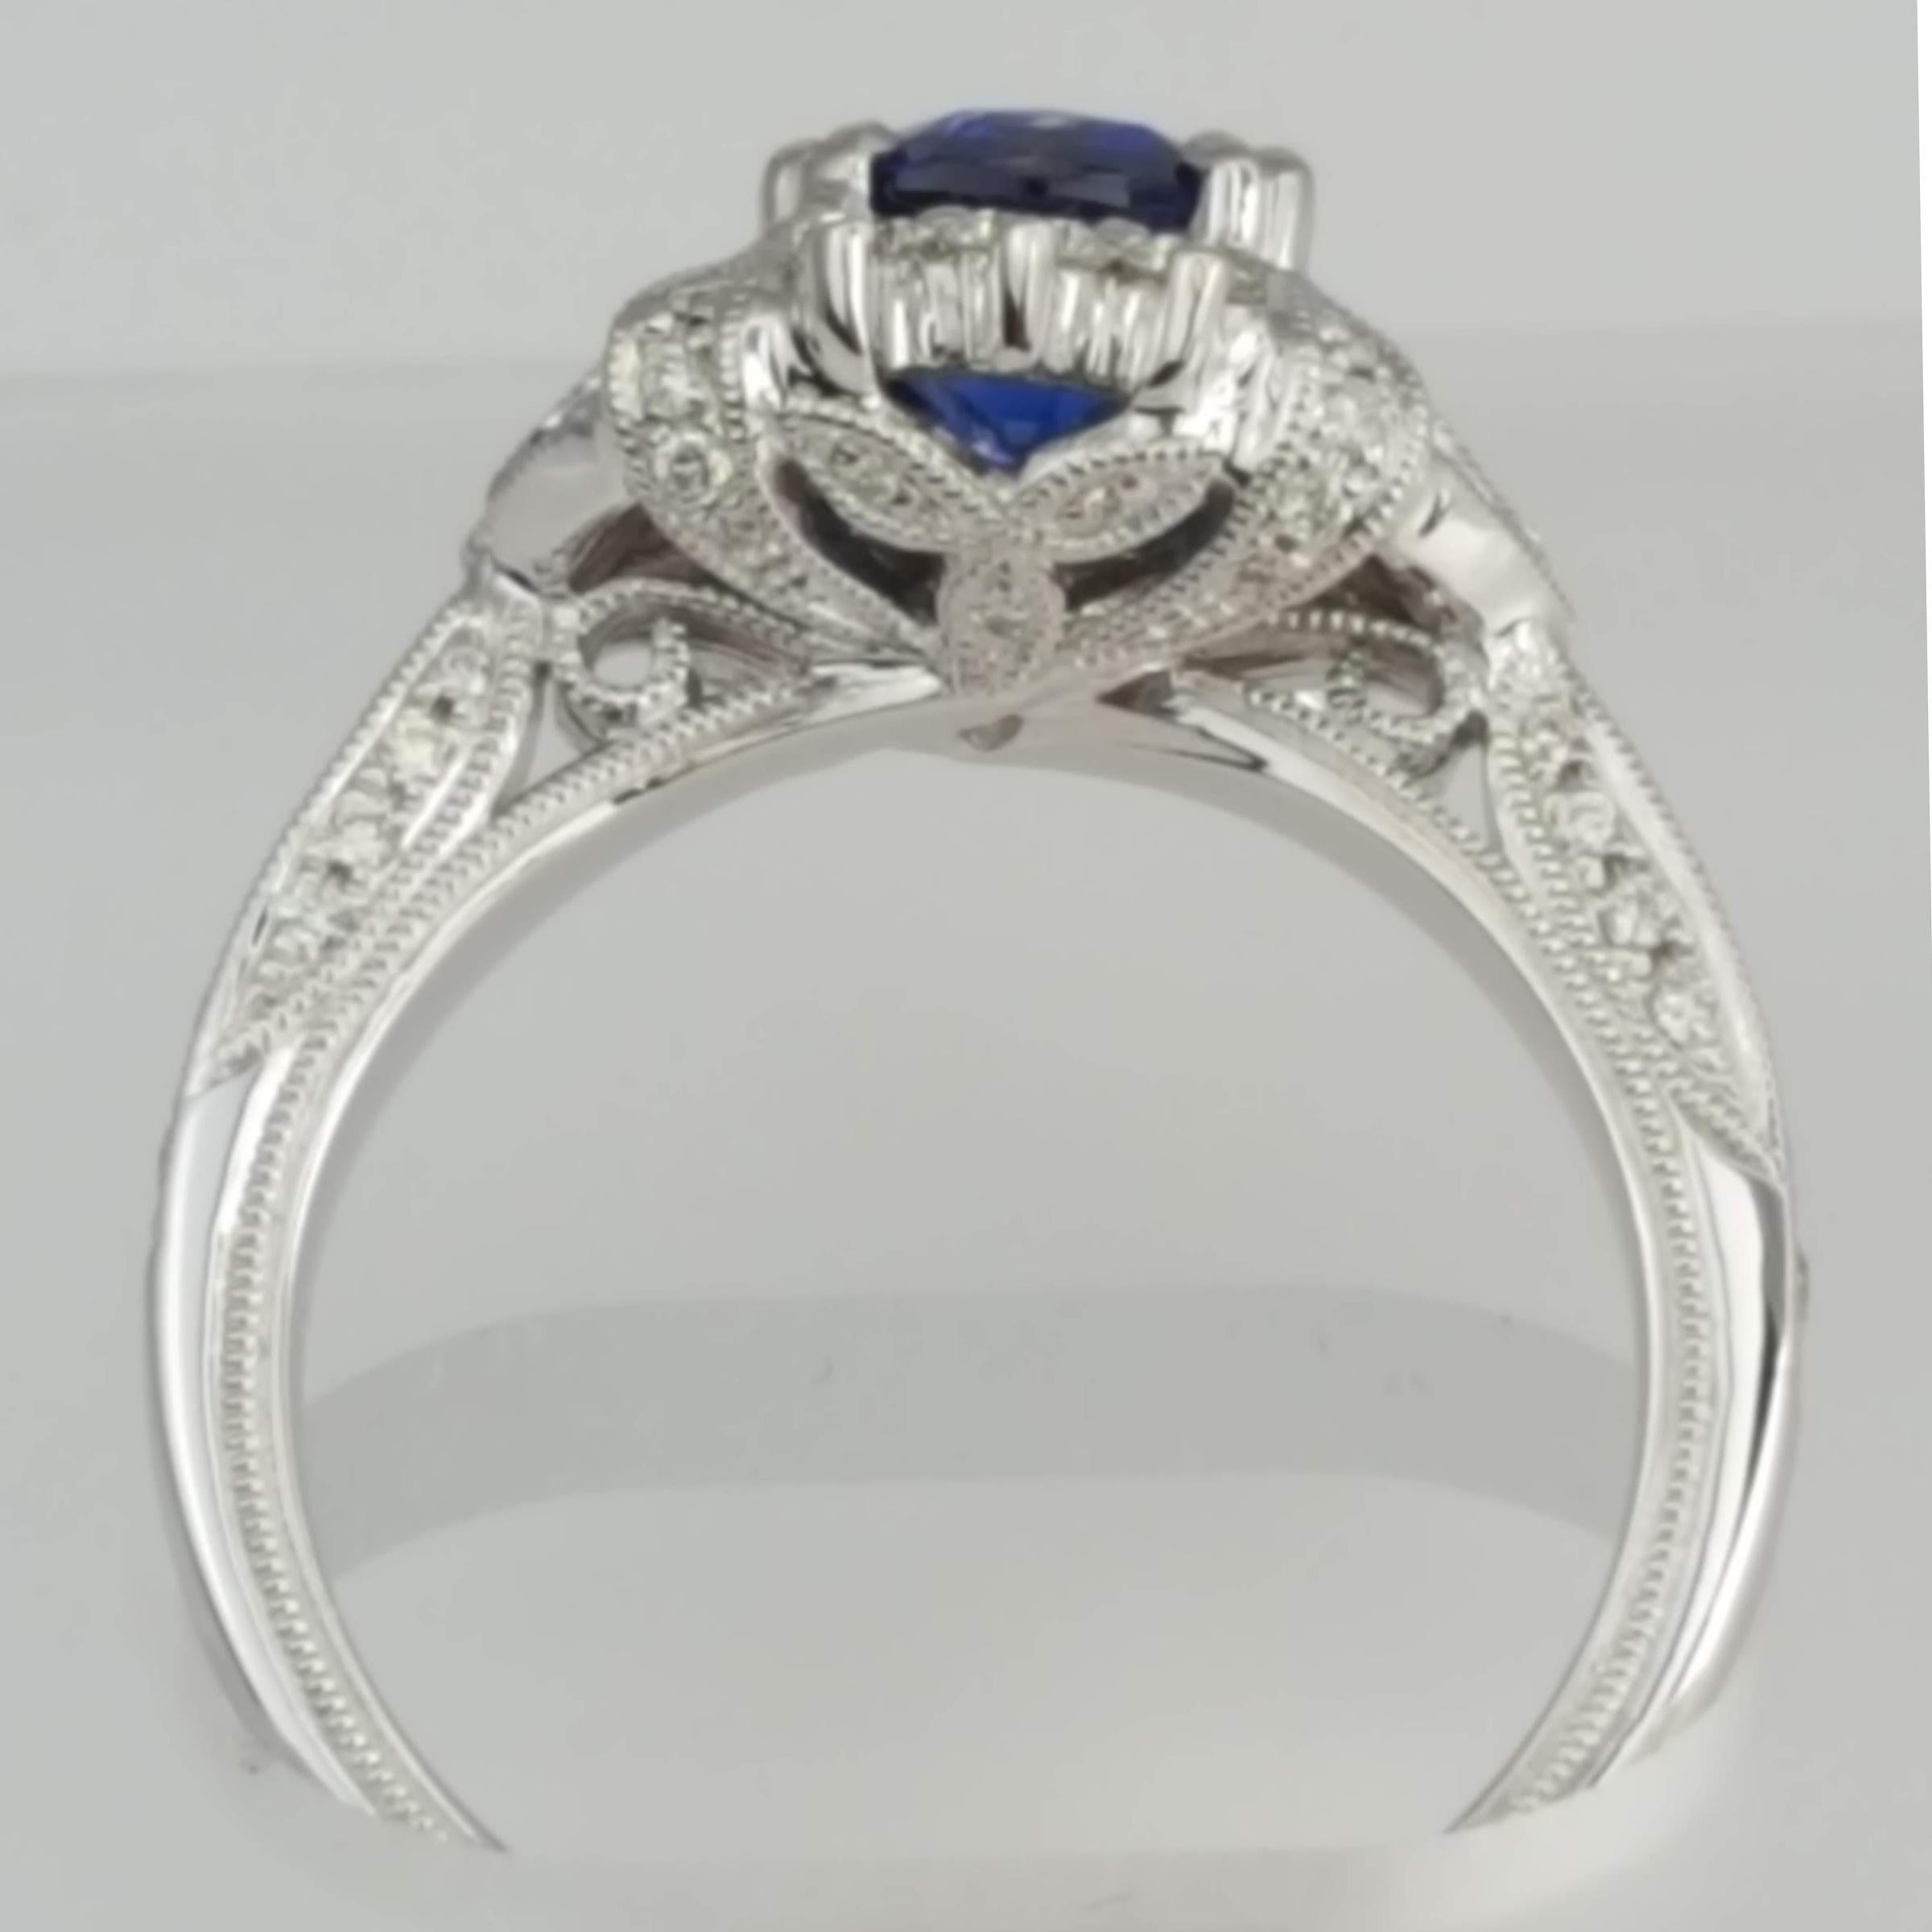 Contemporary 1.6 Carat Cushion Cut Blue Sapphire Ring with 0.63 Carat Natural Diamond ref1364 For Sale